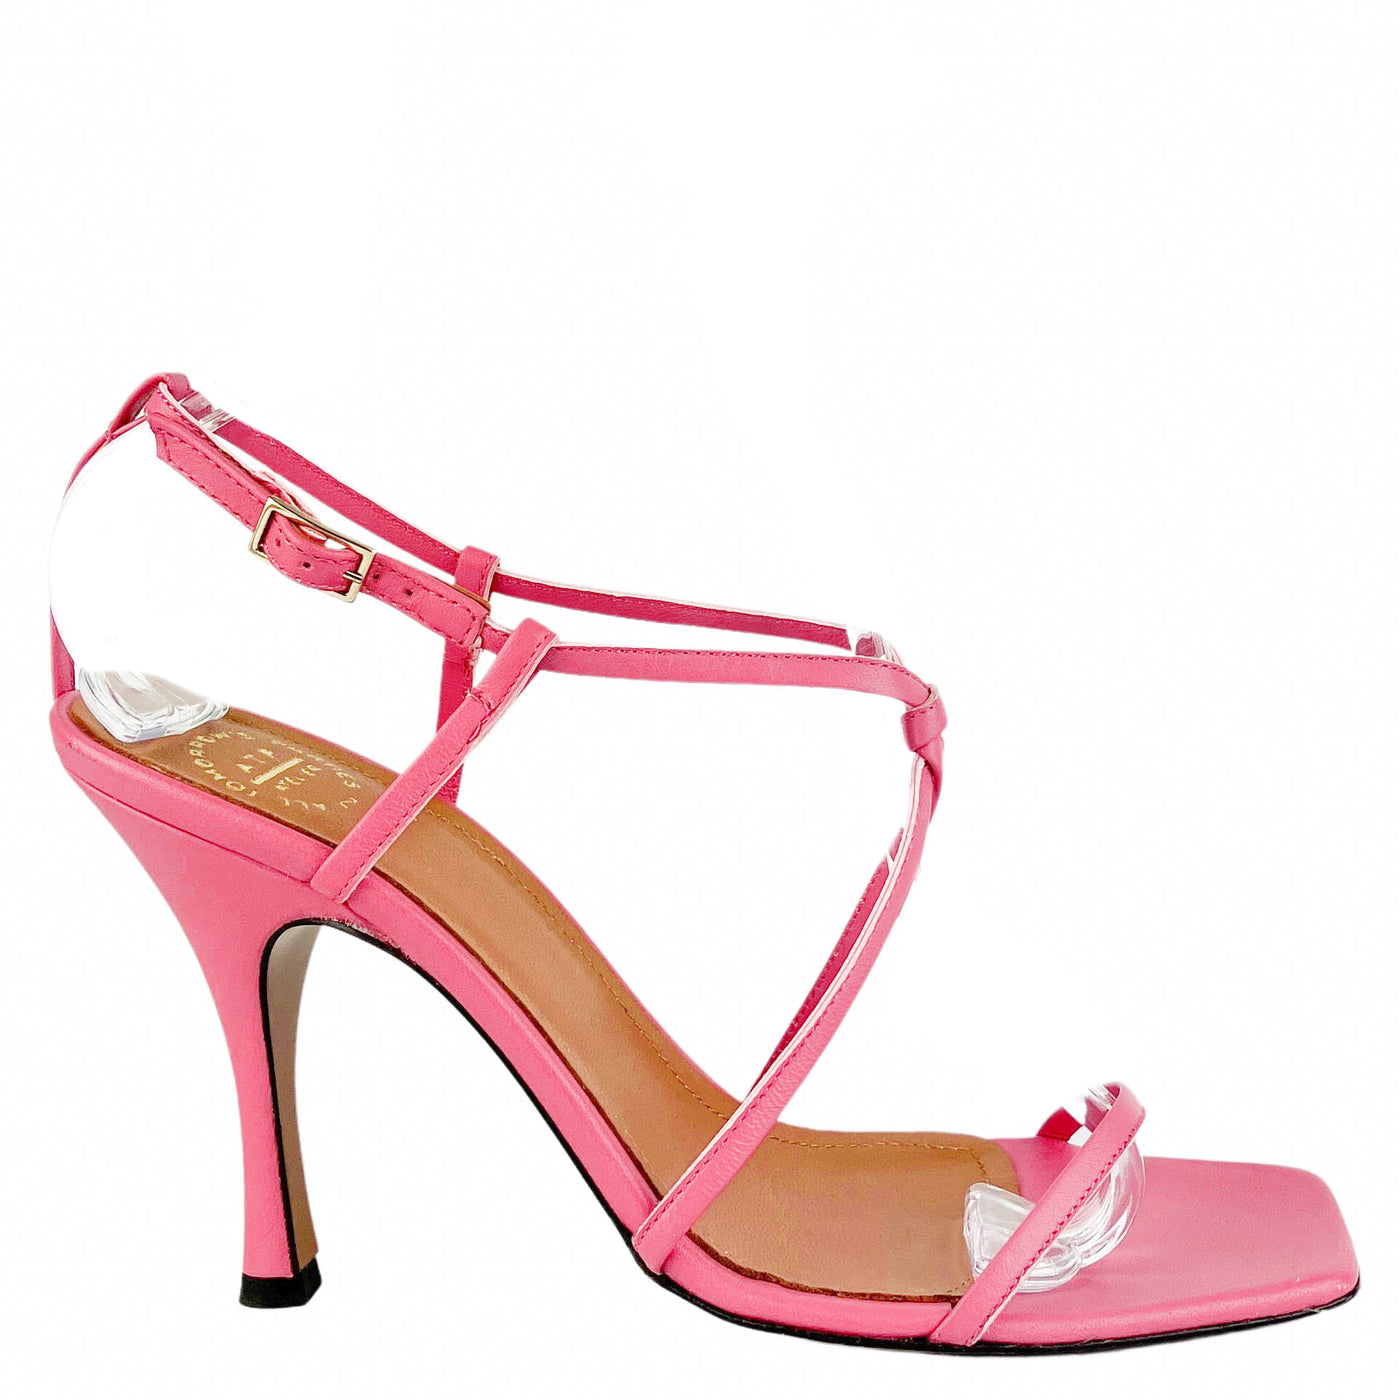 ATP Lapedona Strappy Sandals in Pink - Discounts on ATP Atelier at UAL